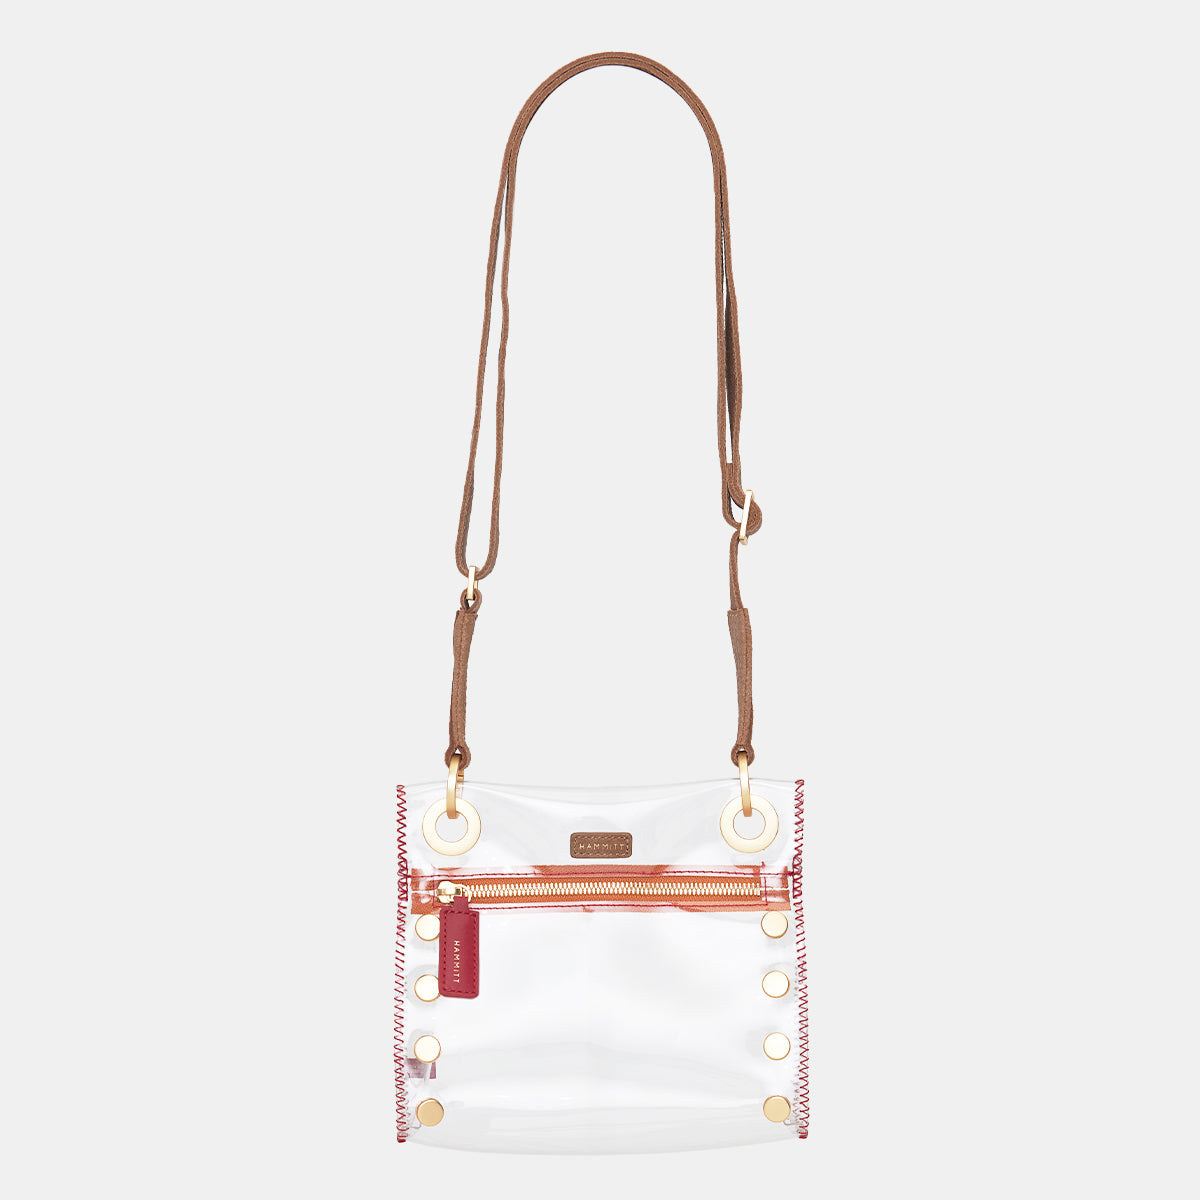 TONY SML STADIUM APPROVED CLEAR BAG - Southern Accents MS